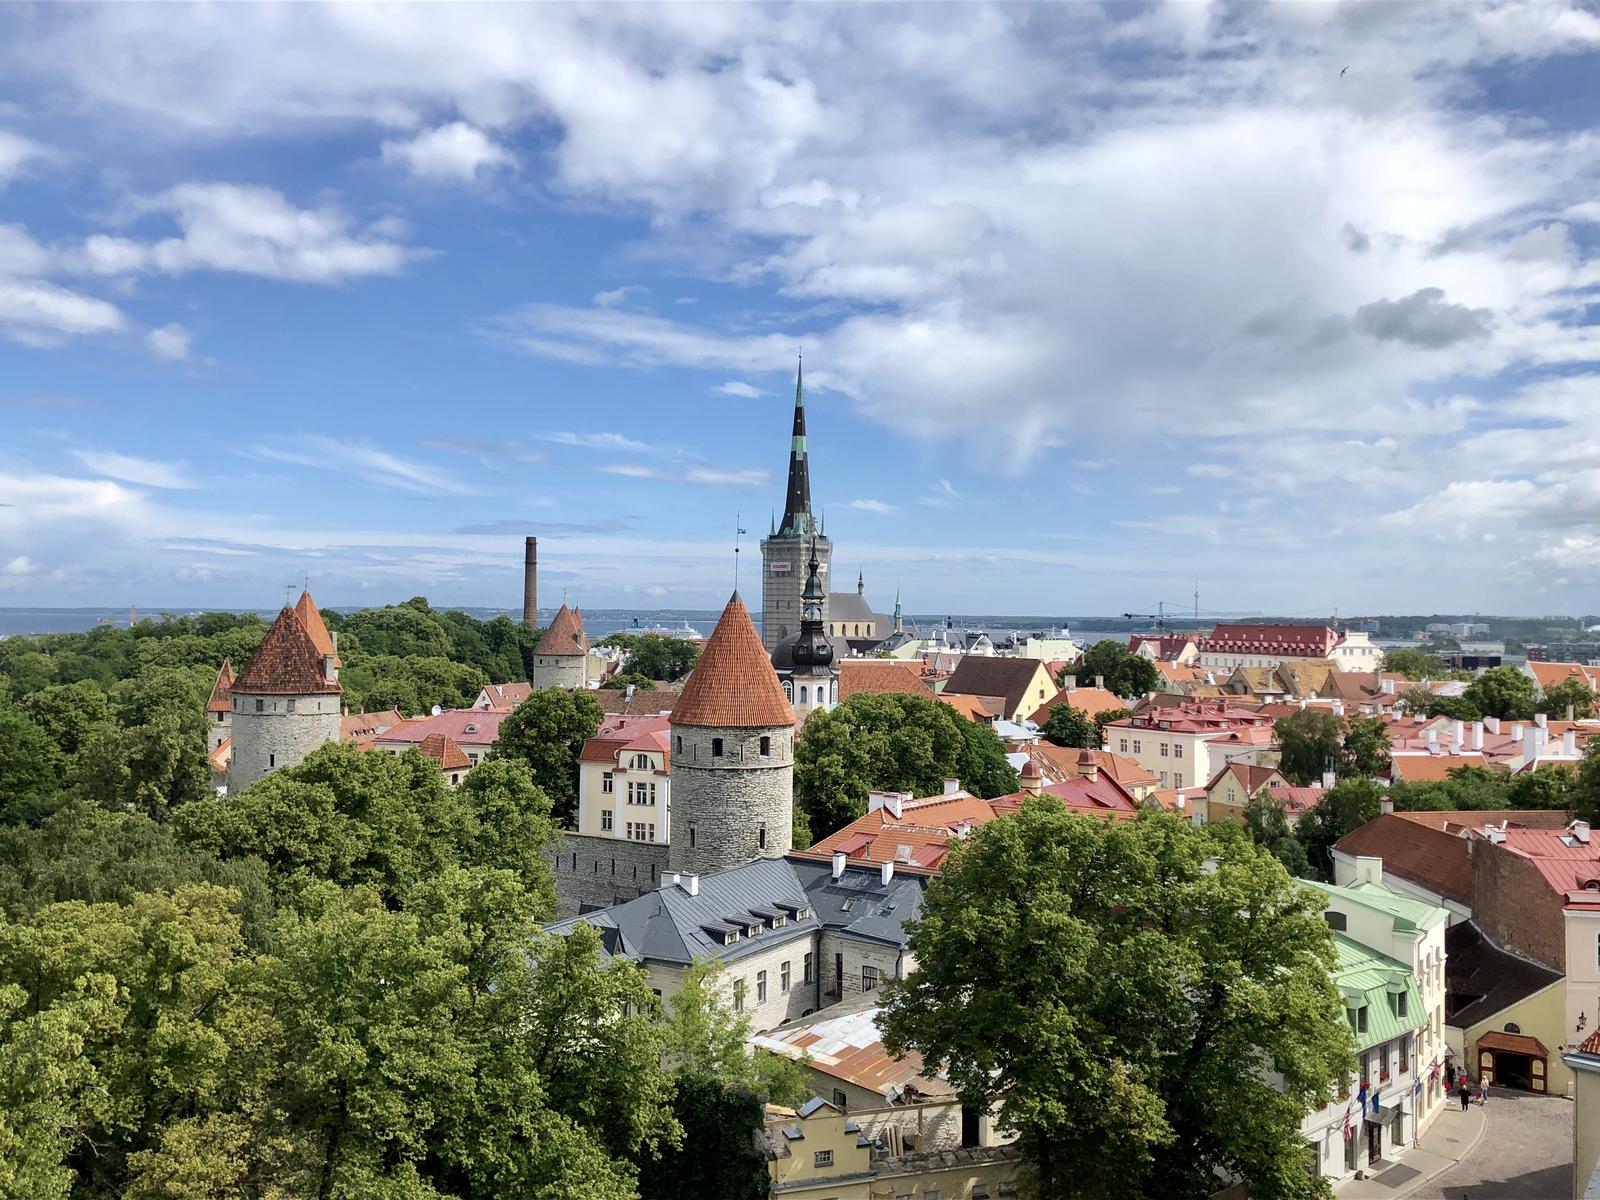 Can You Pass This 40-Question Geography Test That Gets Progressively Harder With Each Question? Estonia